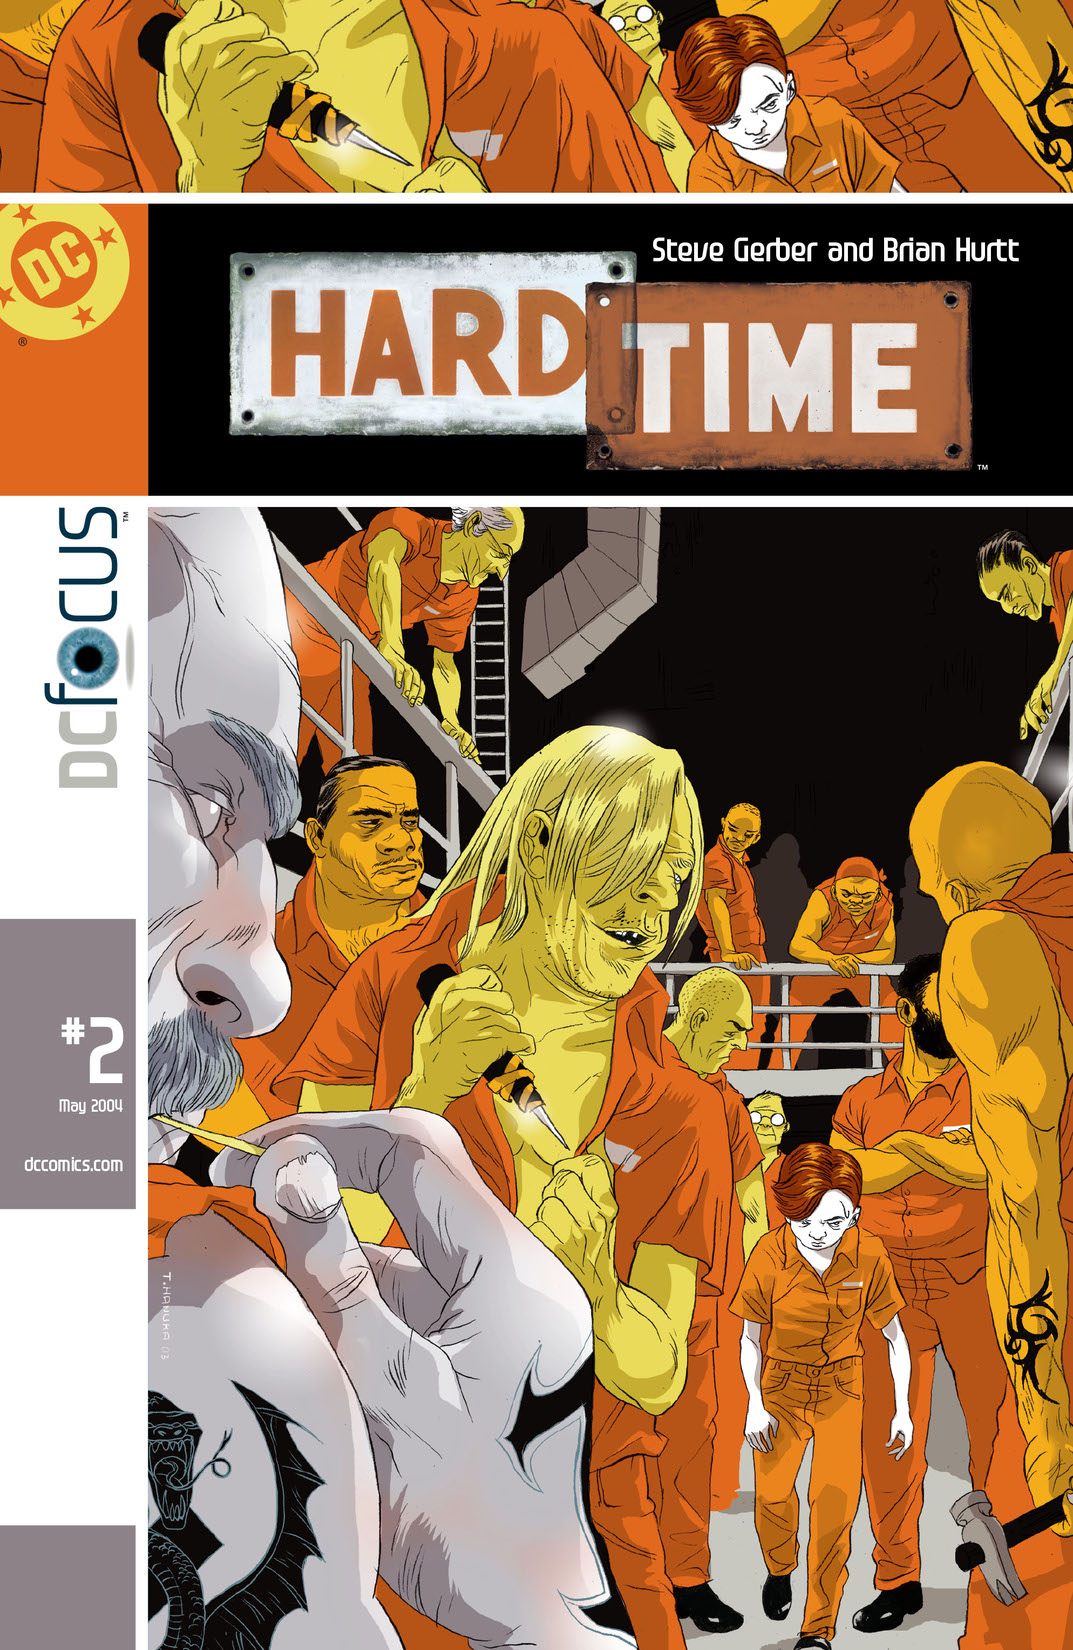 Hard Time #2 preview images